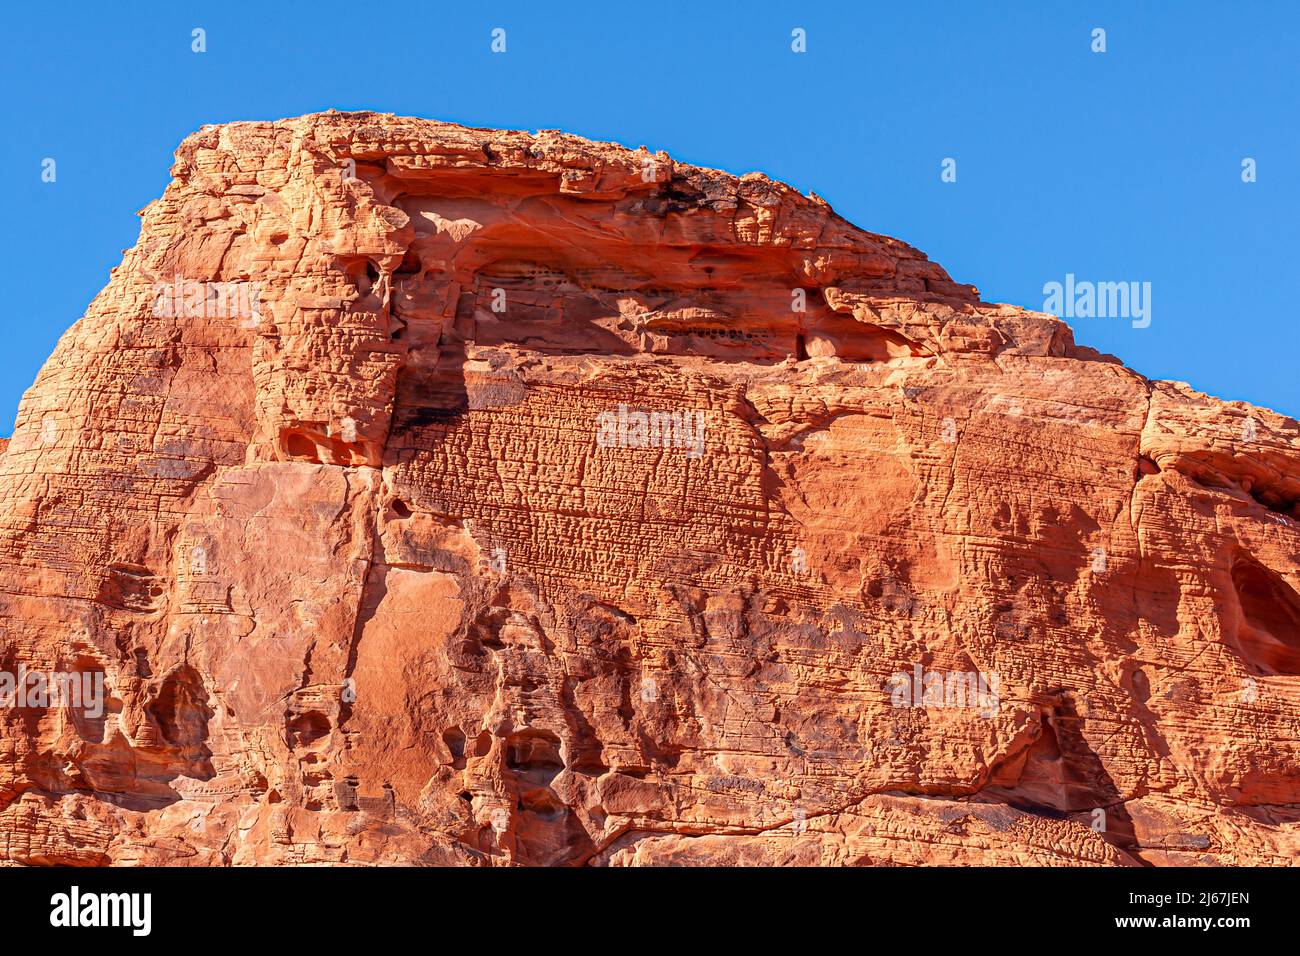 Overton, Nevada, USA - February 24, 2010: Valley of Fire. Lines of ancient script like natural carvings in flank of red rock mountain under blue sky. Stock Photo